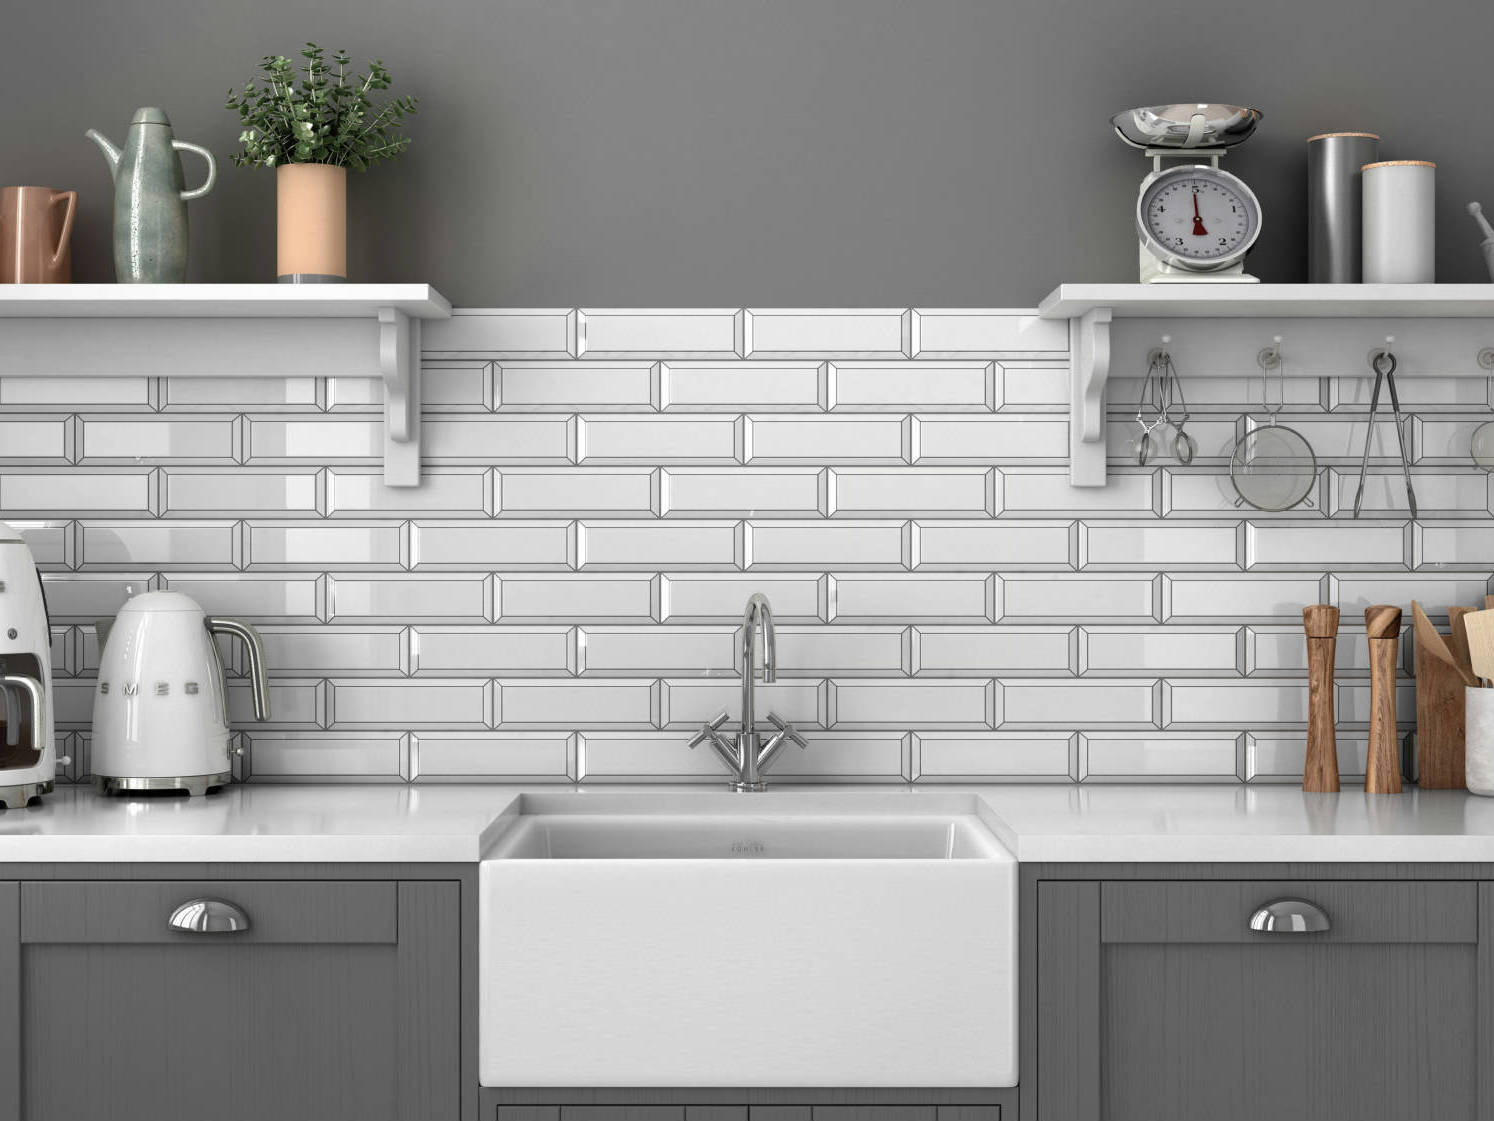 Marco 3X9 White | Best Tile and Wood